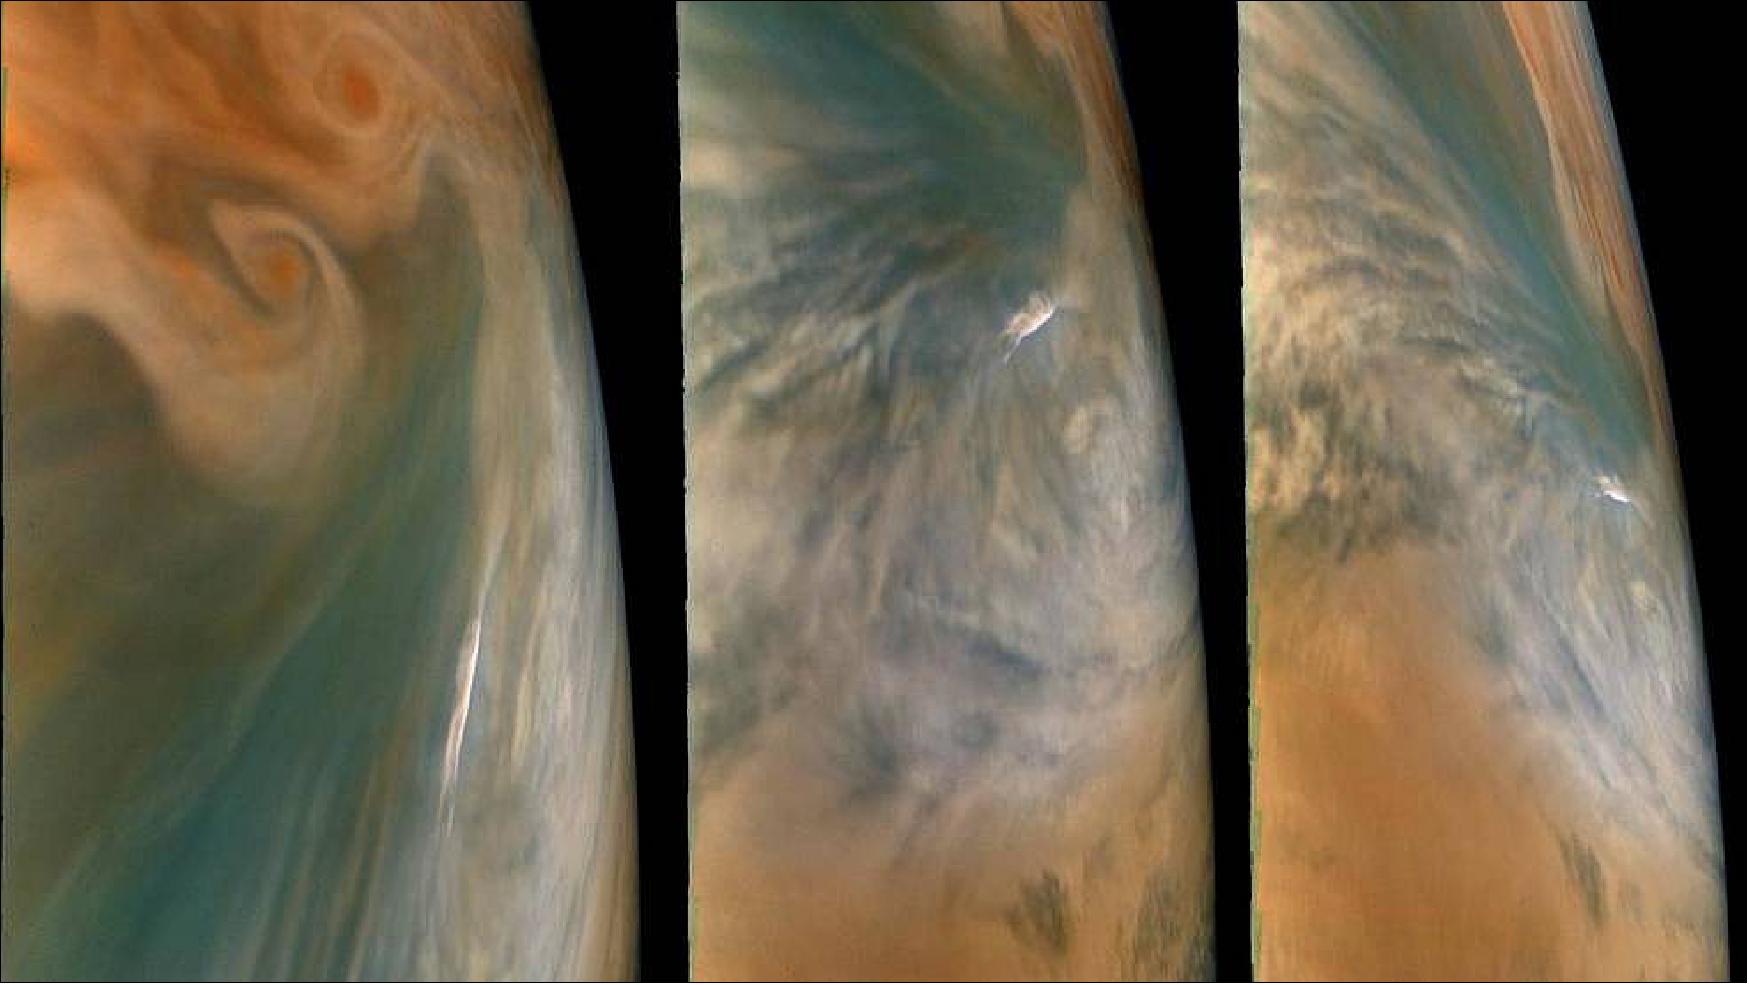 Figure 28: These images from NASA's Juno mission show three views of a Jupiter "hot spot" - a break in Jupiter's cloud deck that provides a glimpse into the planet's deep atmosphere. The pictures were taken by the JunoCam imager during the spacecraft's 29th close flyby of the giant planet on Sept. 16, 2020 (credits: Image data: NASA/JPL-Caltech/SwRI/MSSS. Image processing: Brian Swift © CC BY)